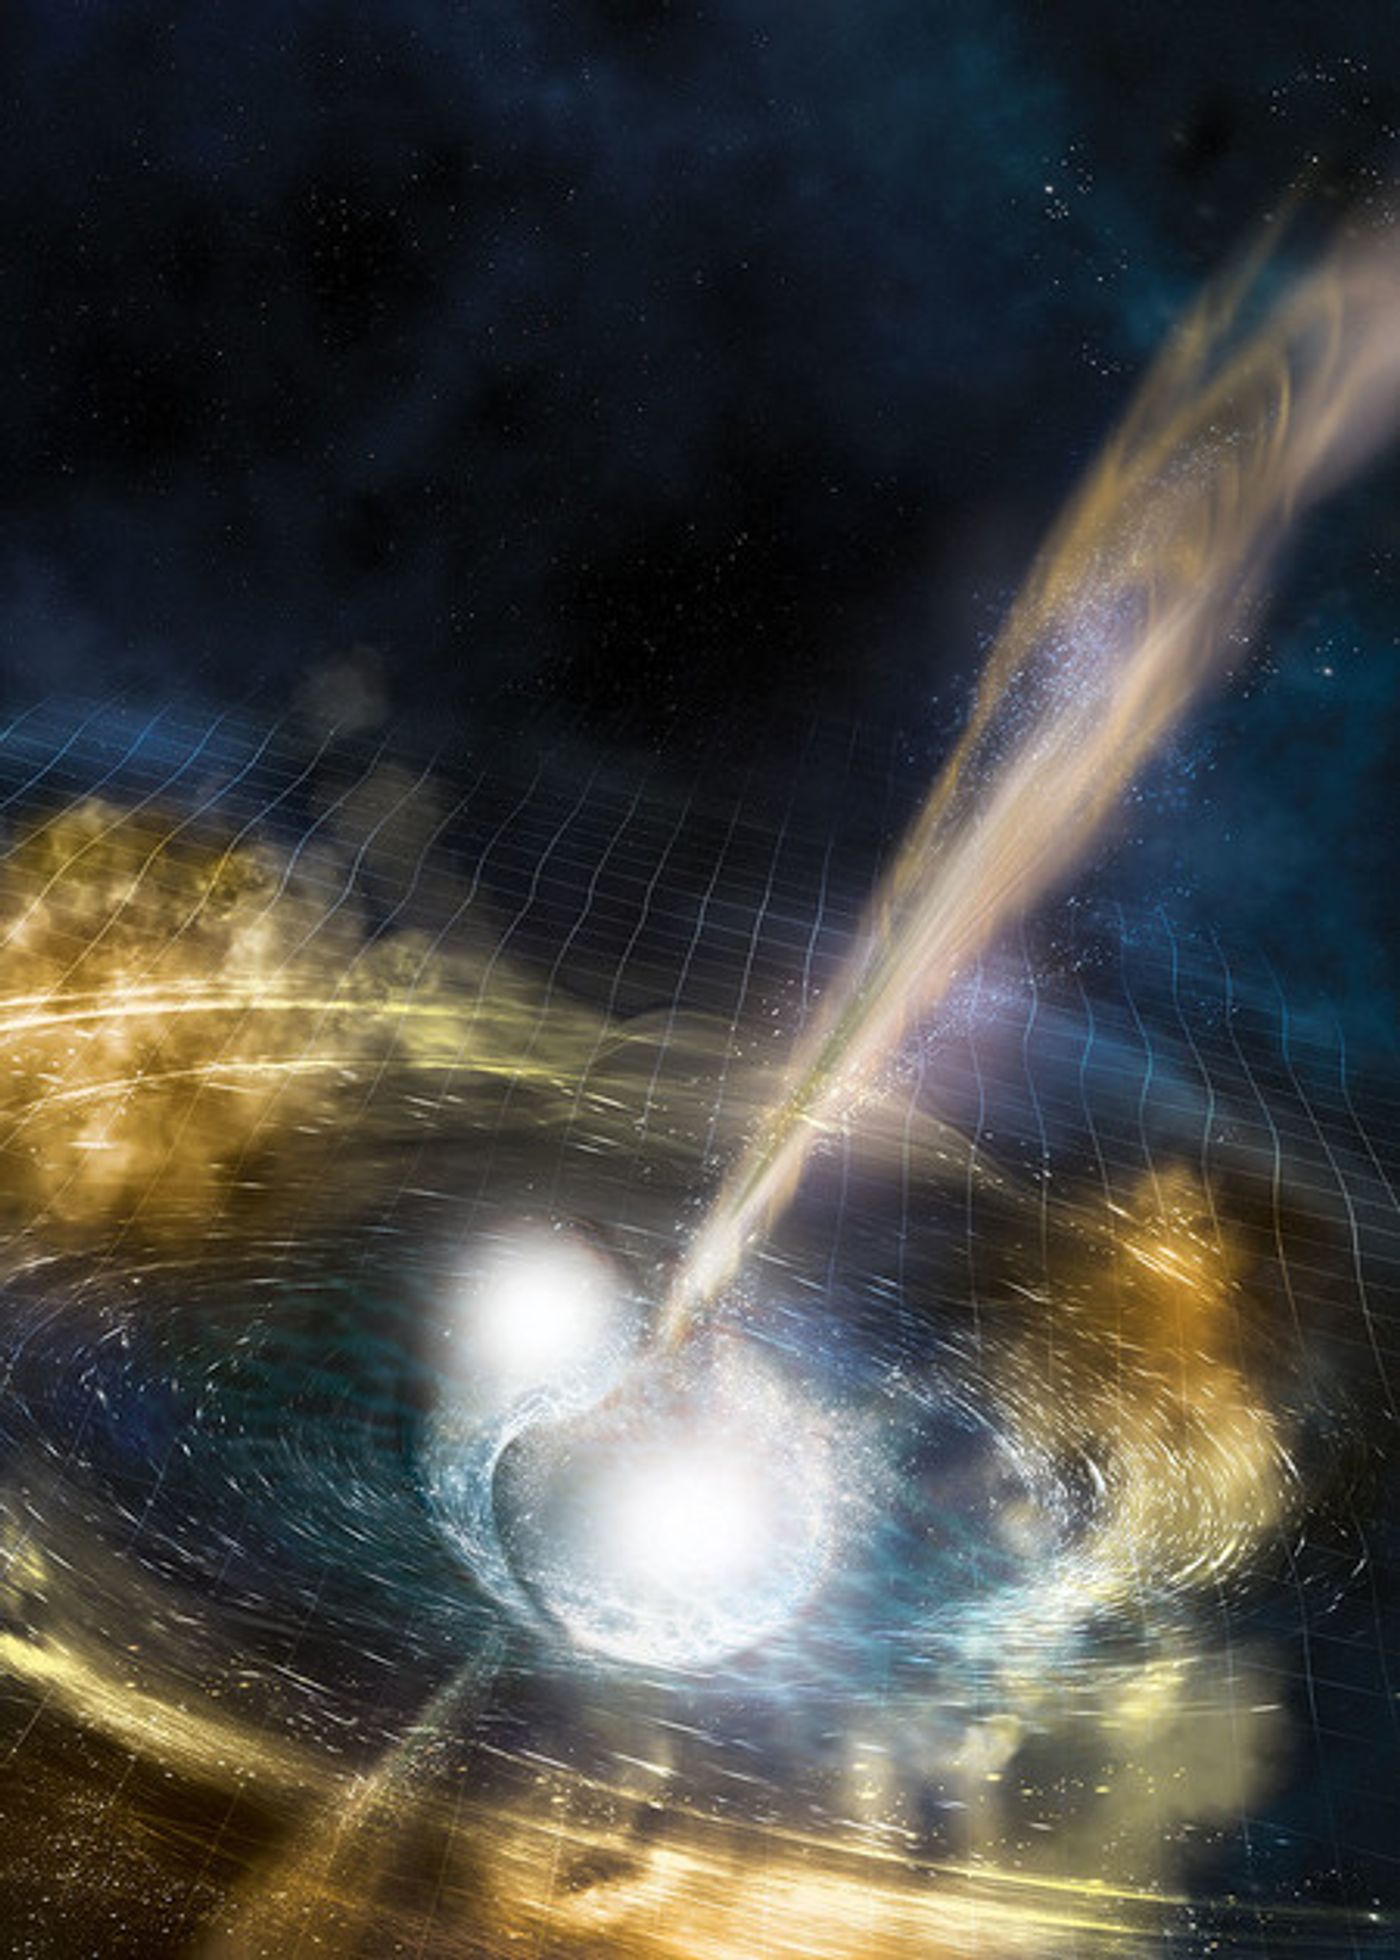 An artist's impression of two neutron stars merging together.